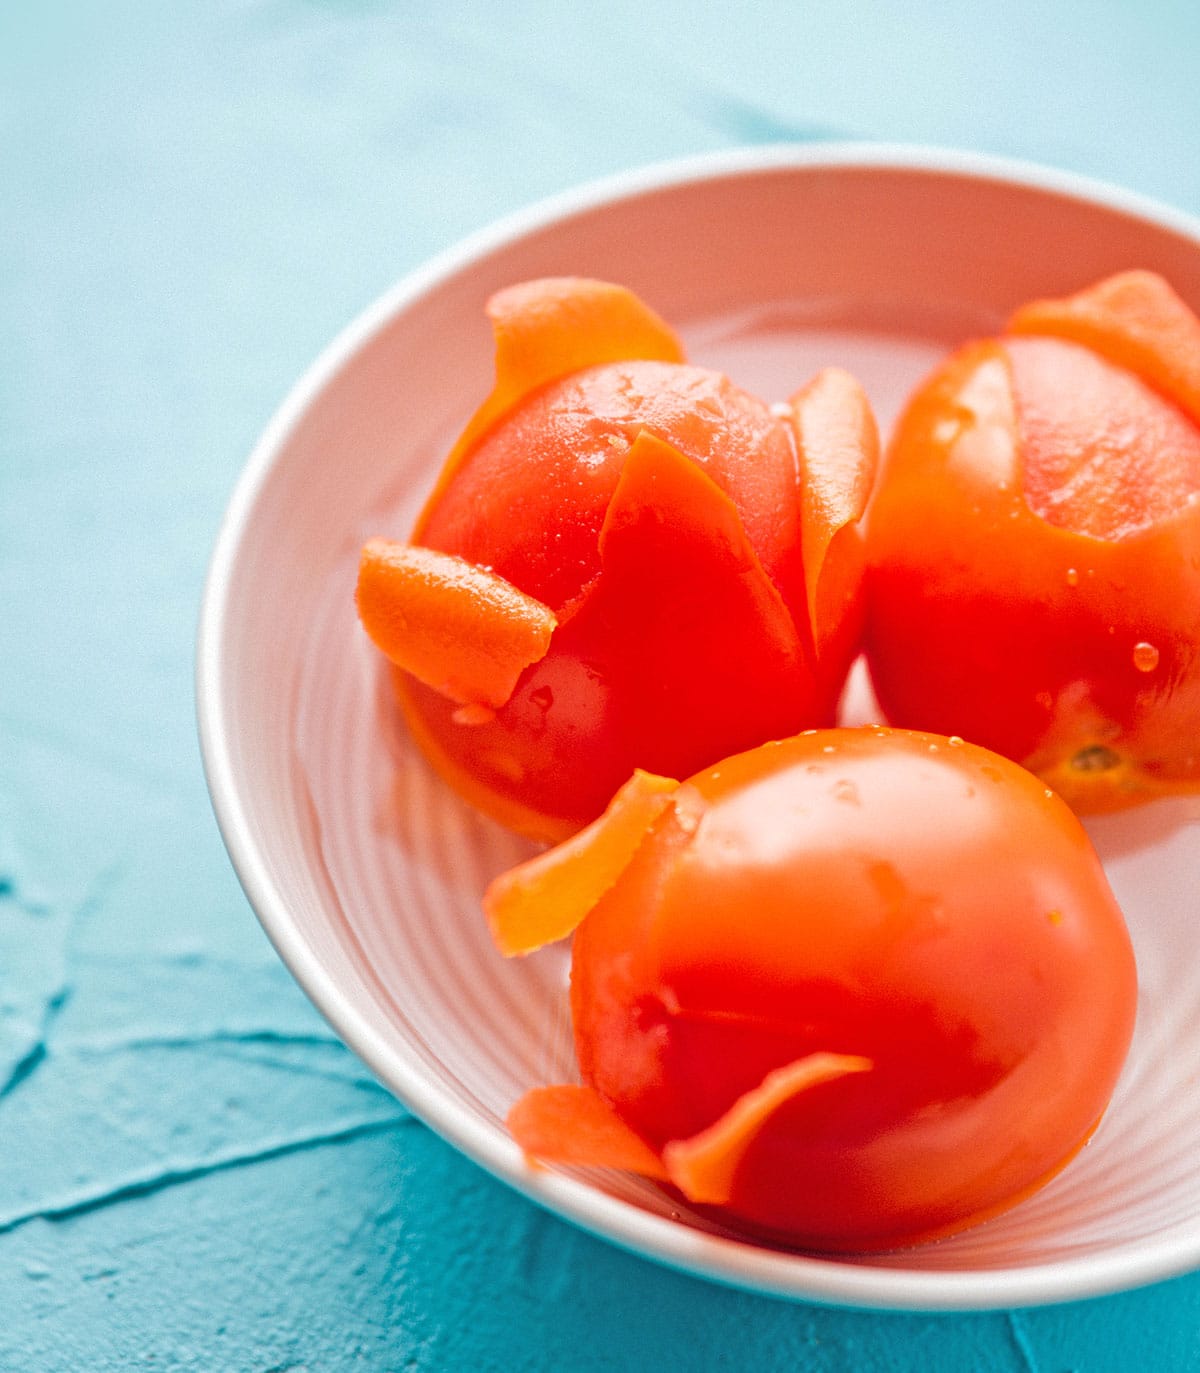 How to peel tomatoes by blanching